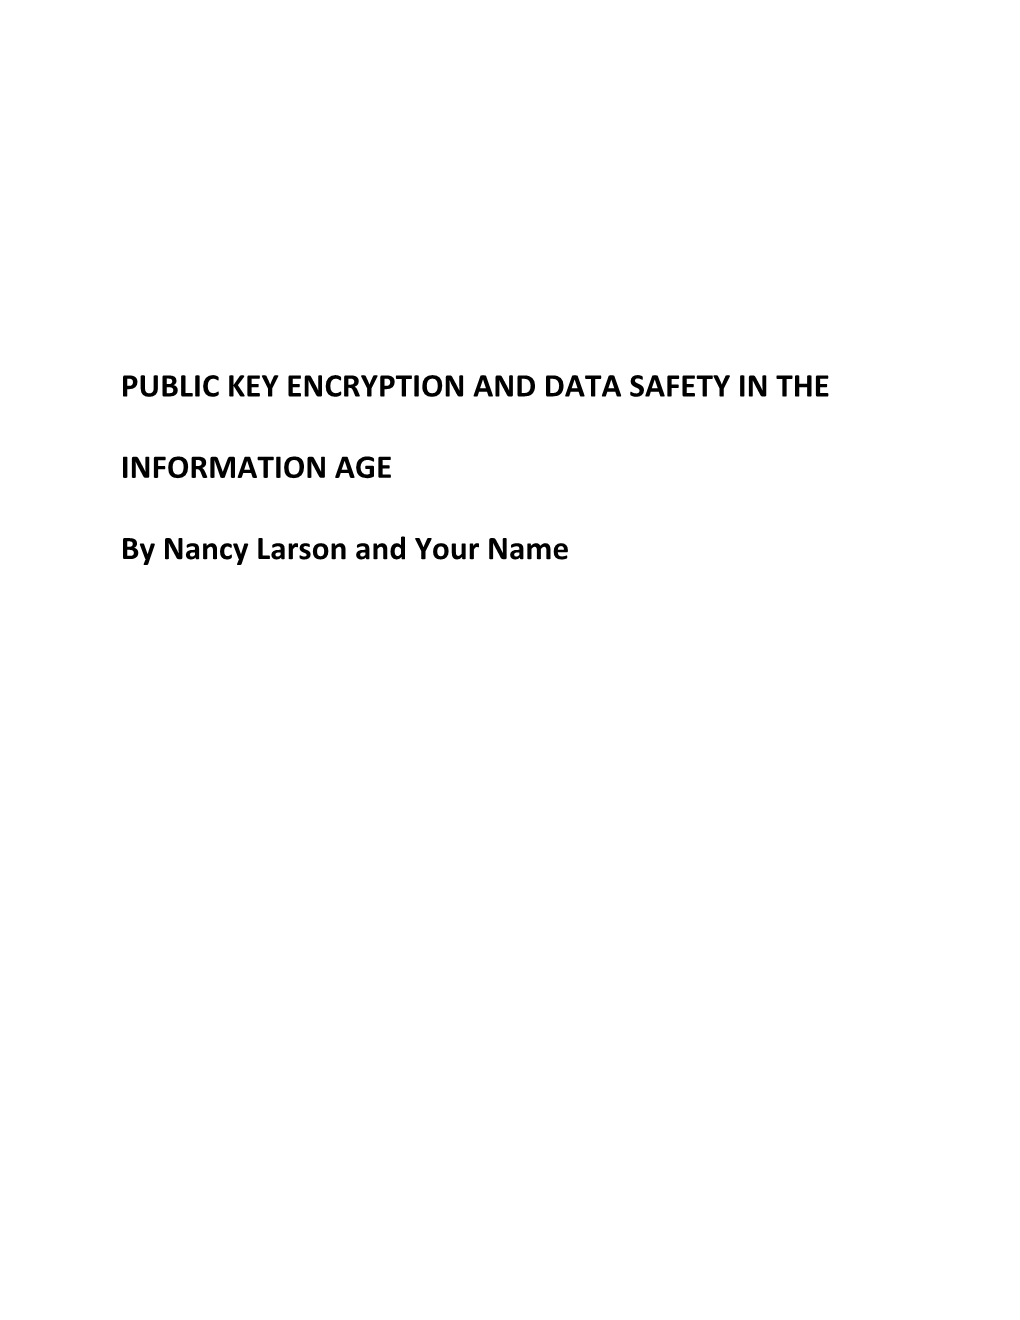 Public Key Encryption Anddata Safety in the Information Age